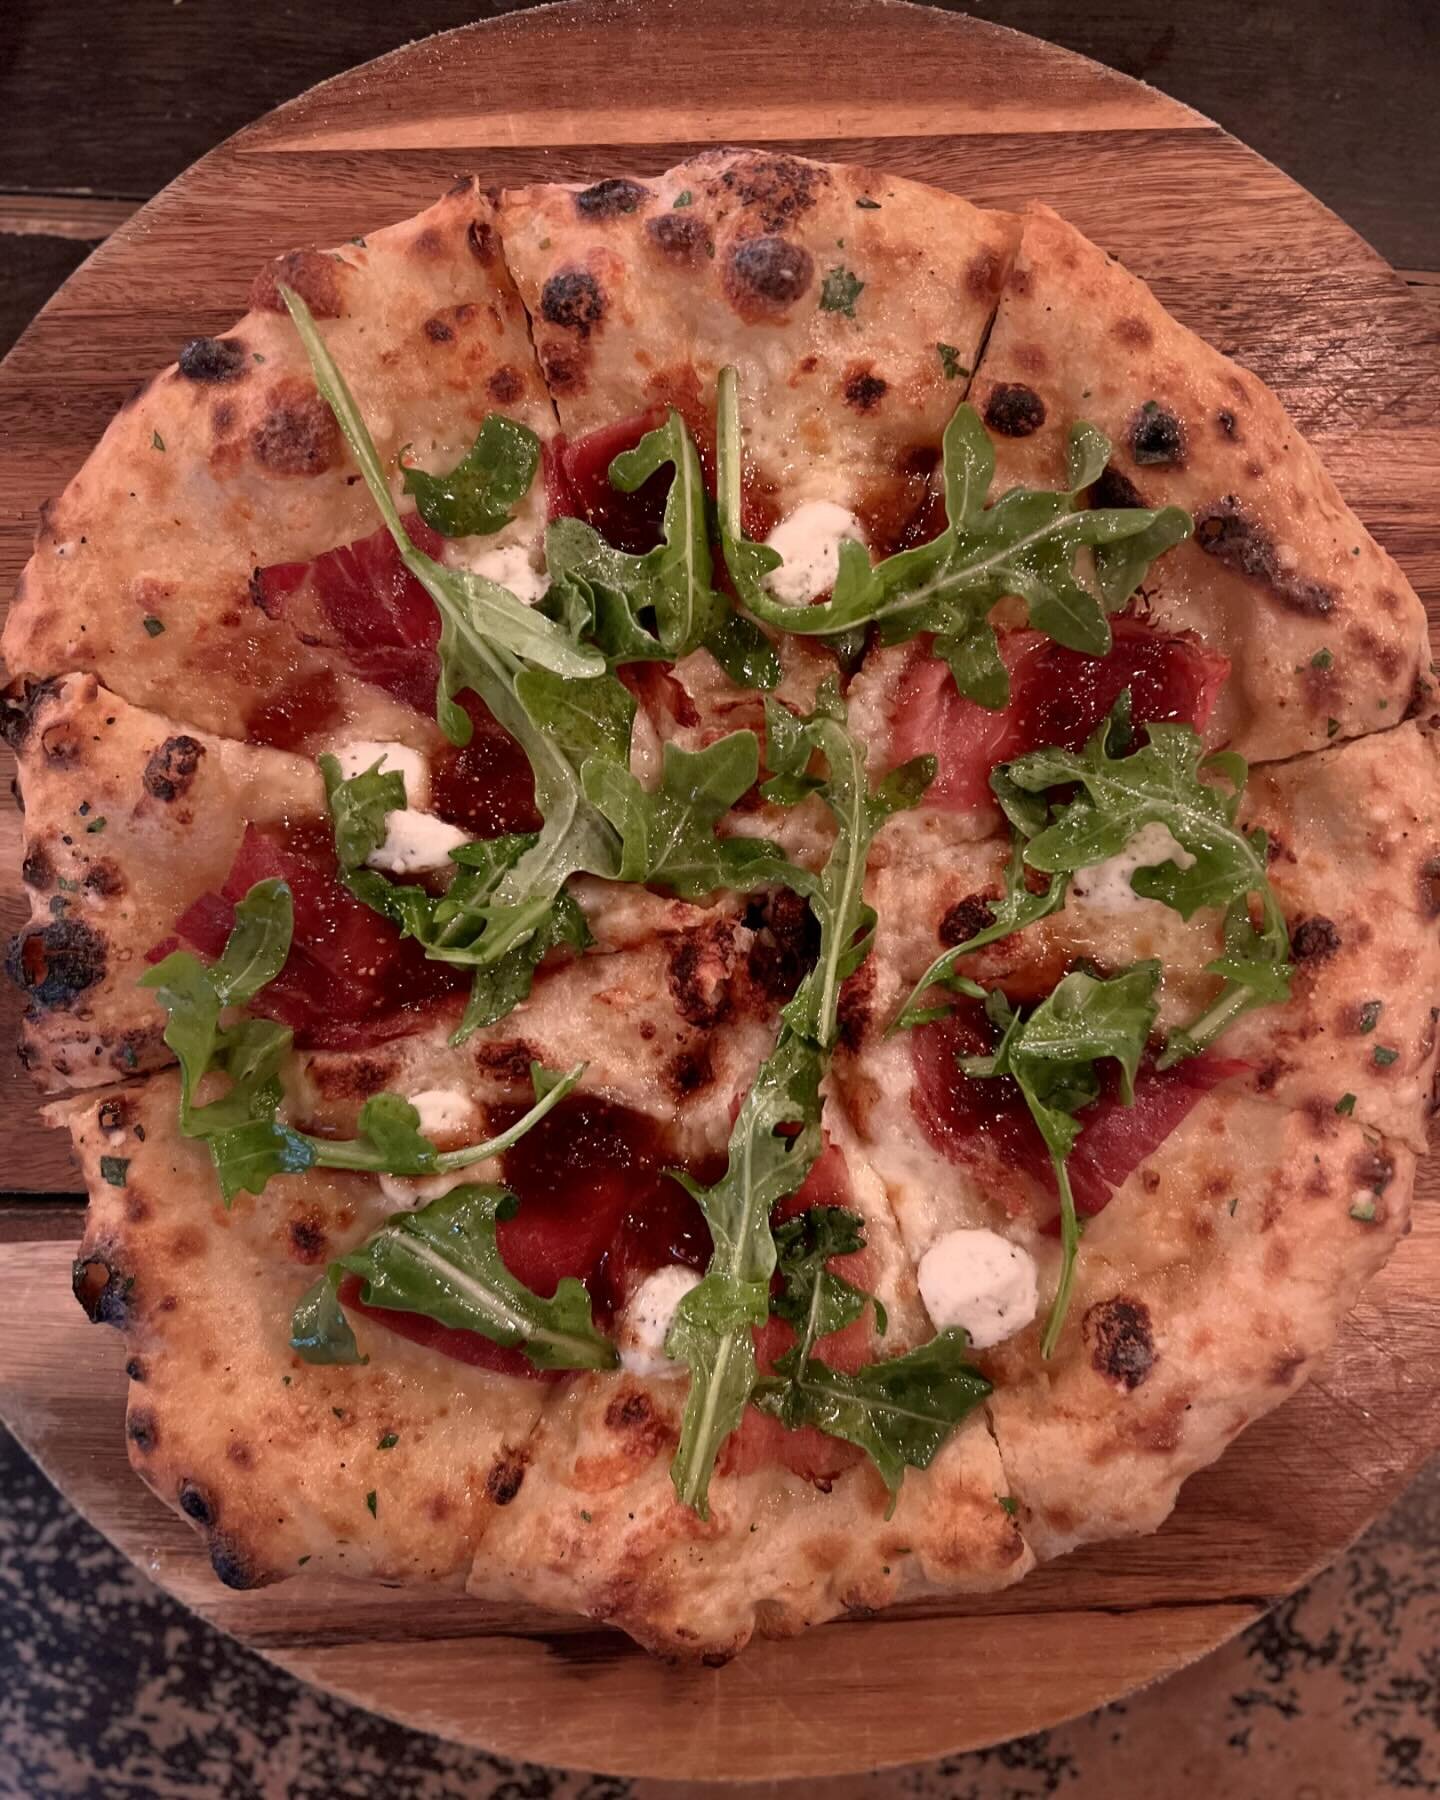 @chef_eddie_leyva taking the Locale specials to the next level! Delicious Speck Pizza, with Goat Cheese, Fig Jam, and Arugula.